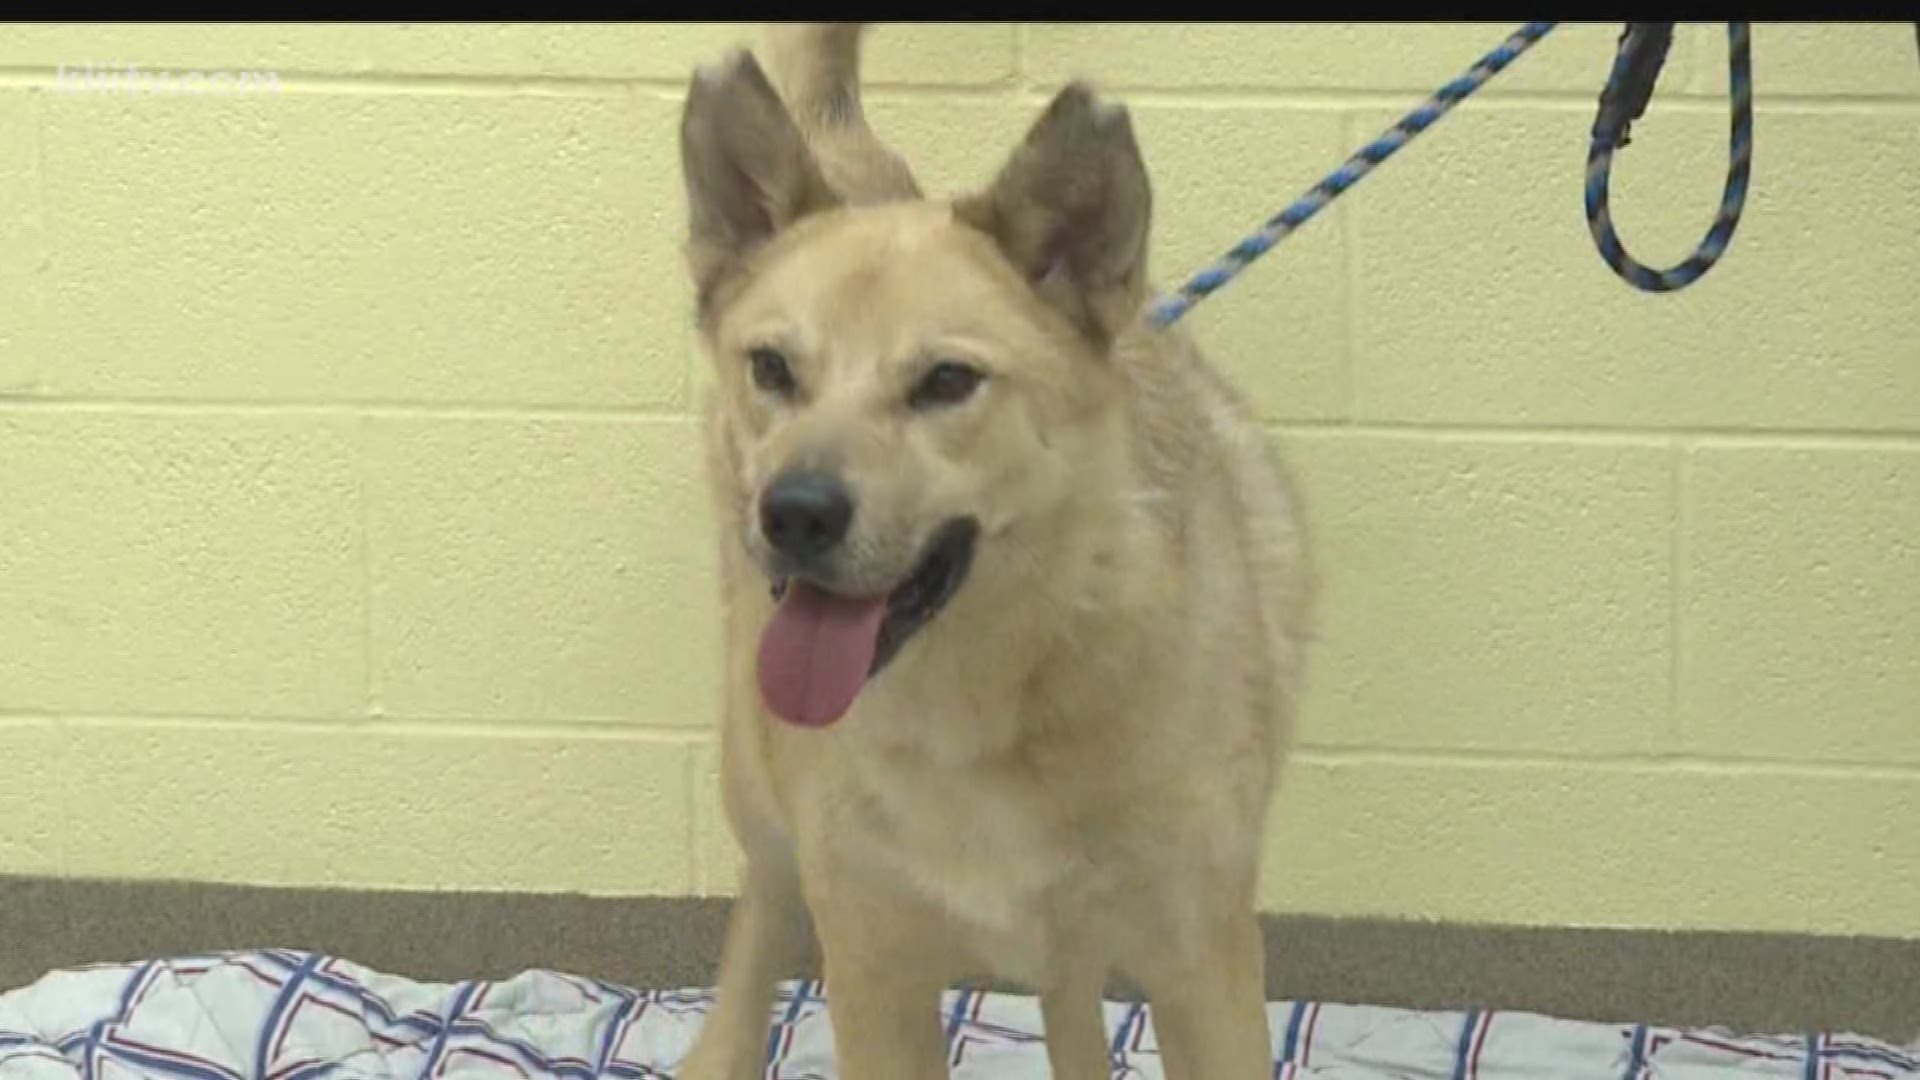 Adopt Chase from the Gulf Coast Humane Society.